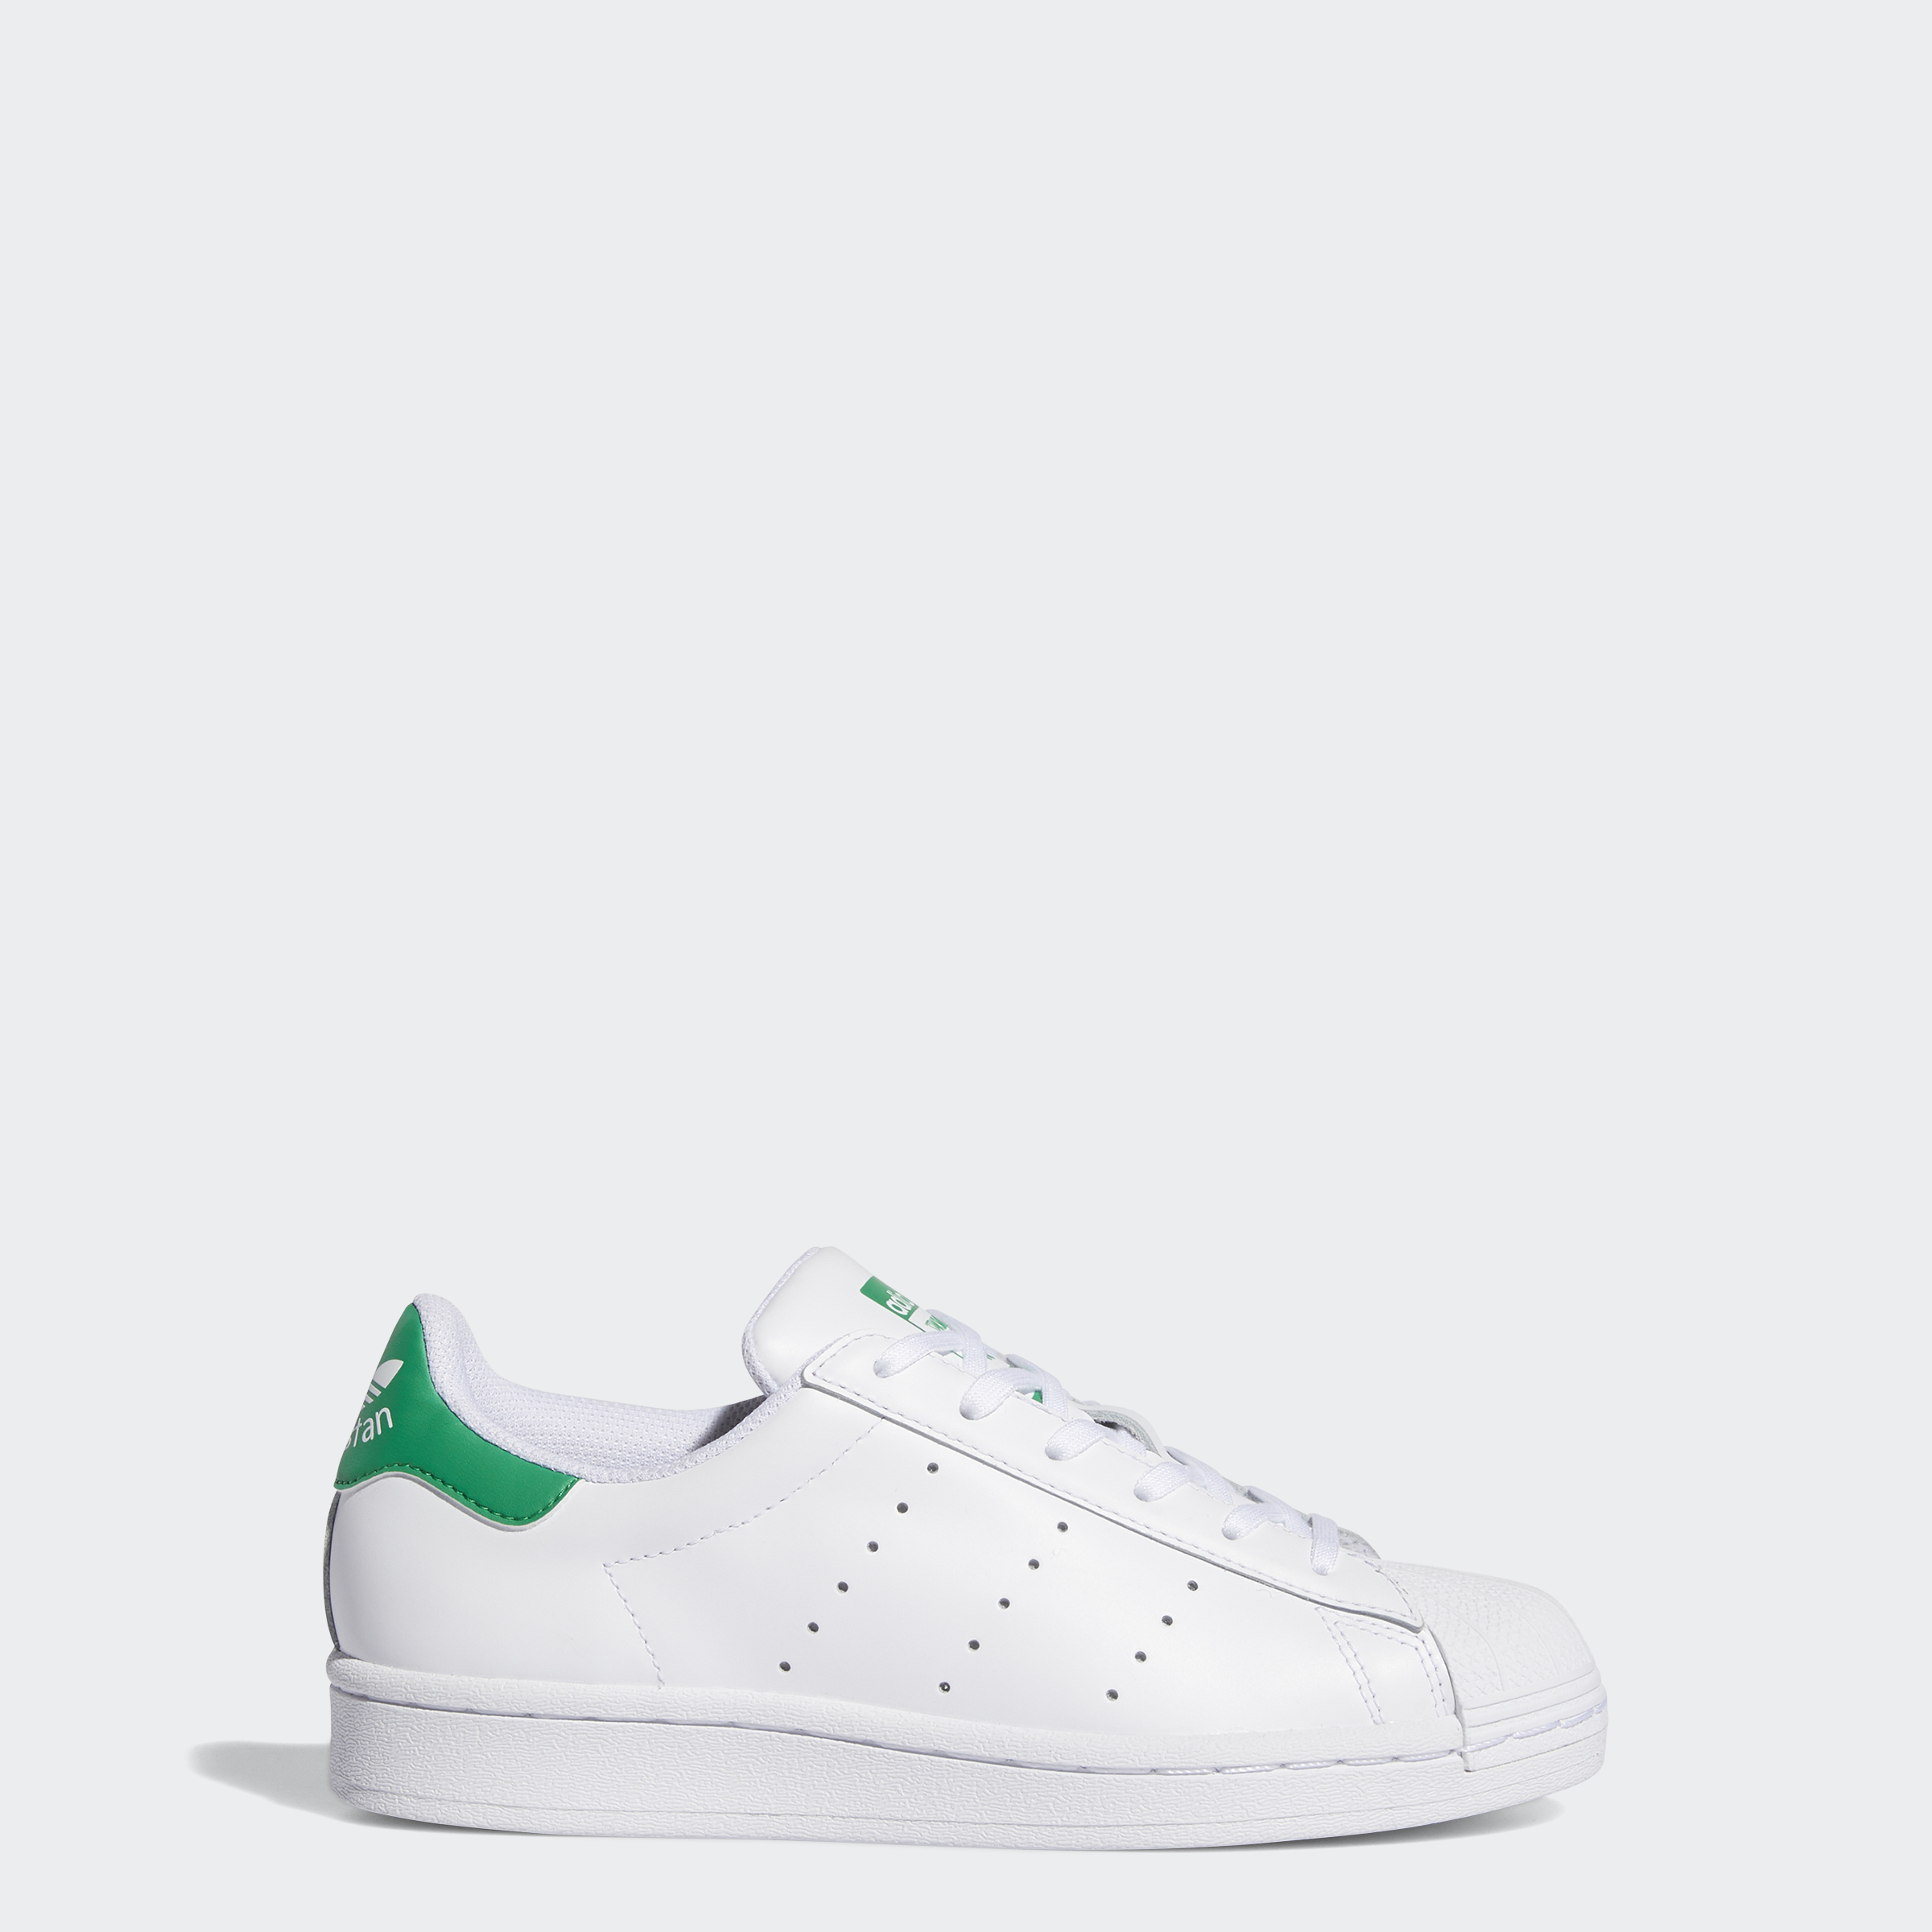 adidas Superstar Stan Smith Shoes Kids' Athletic & Sneakers | eBay